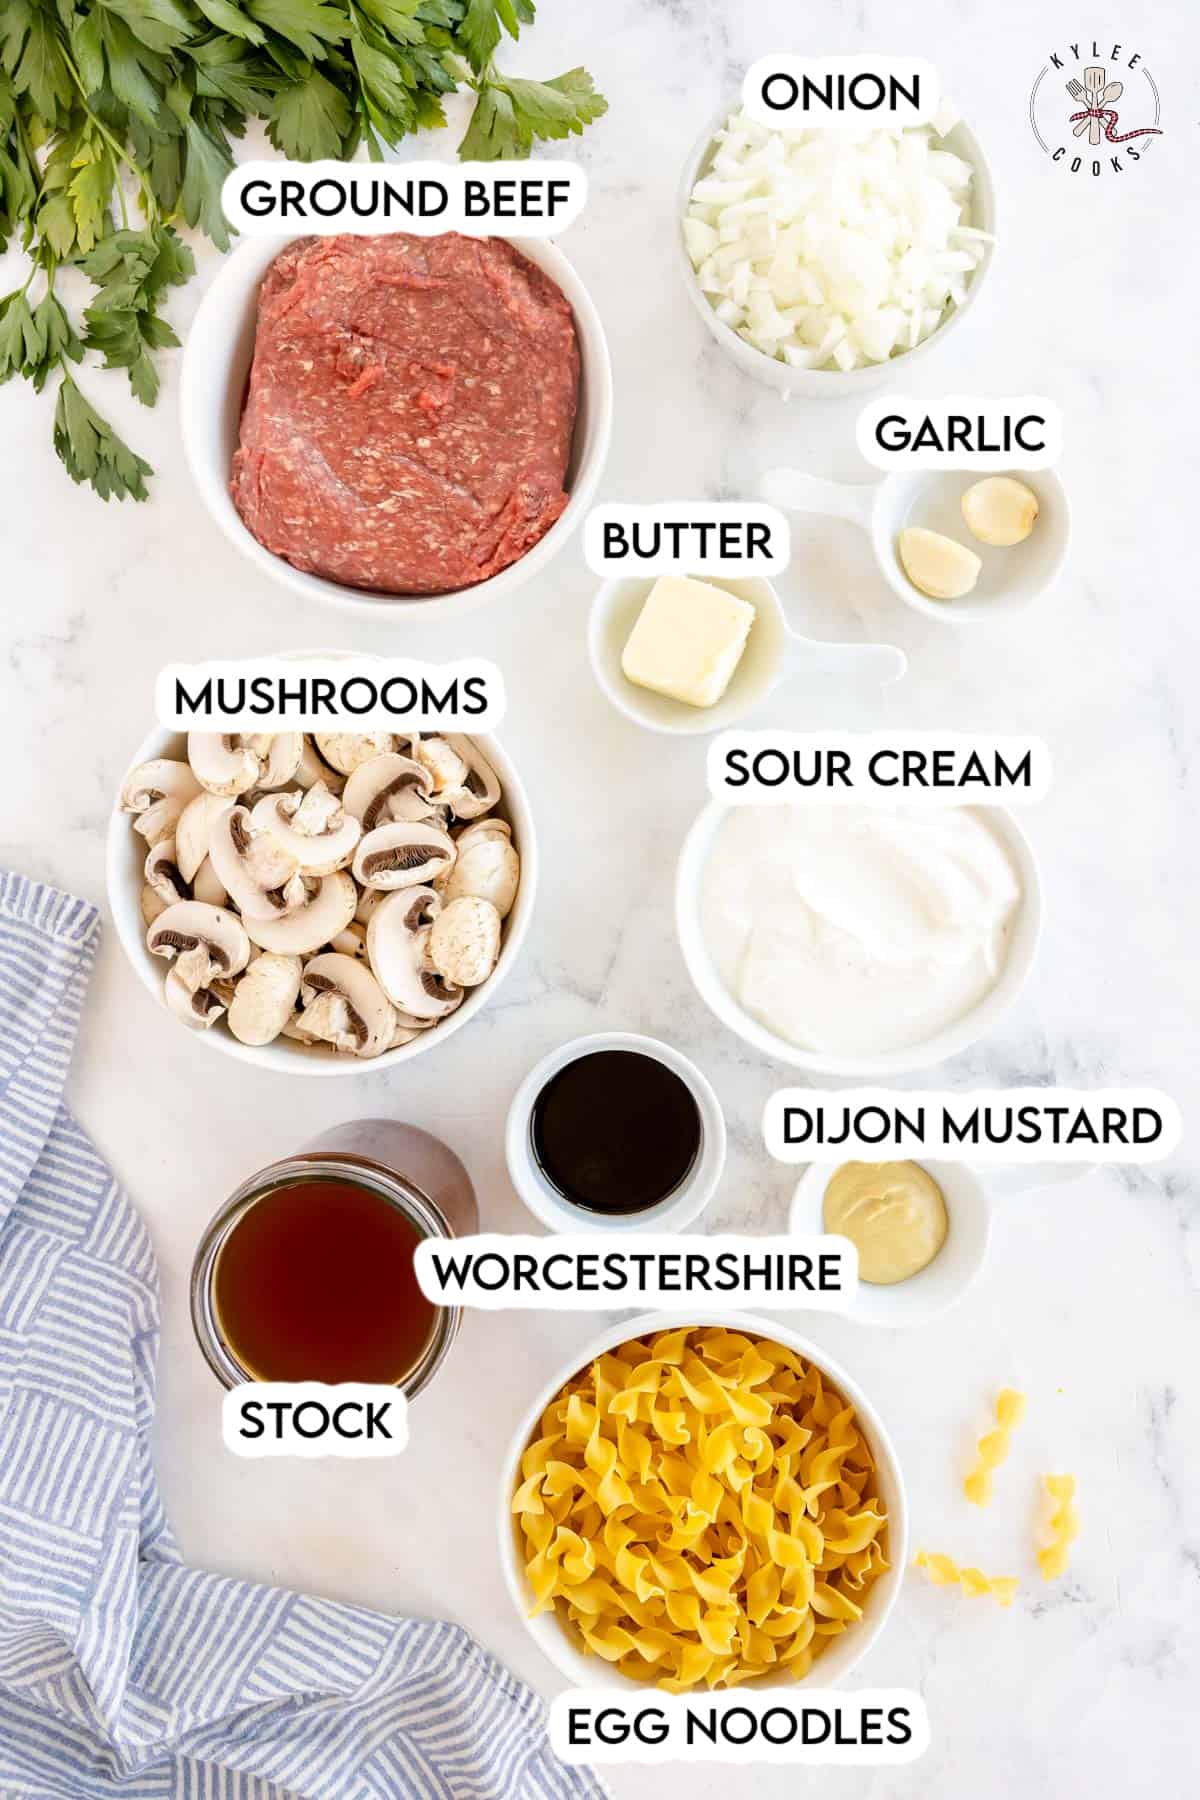 ingredients to make ground beef stroganoff laid out and labeled.